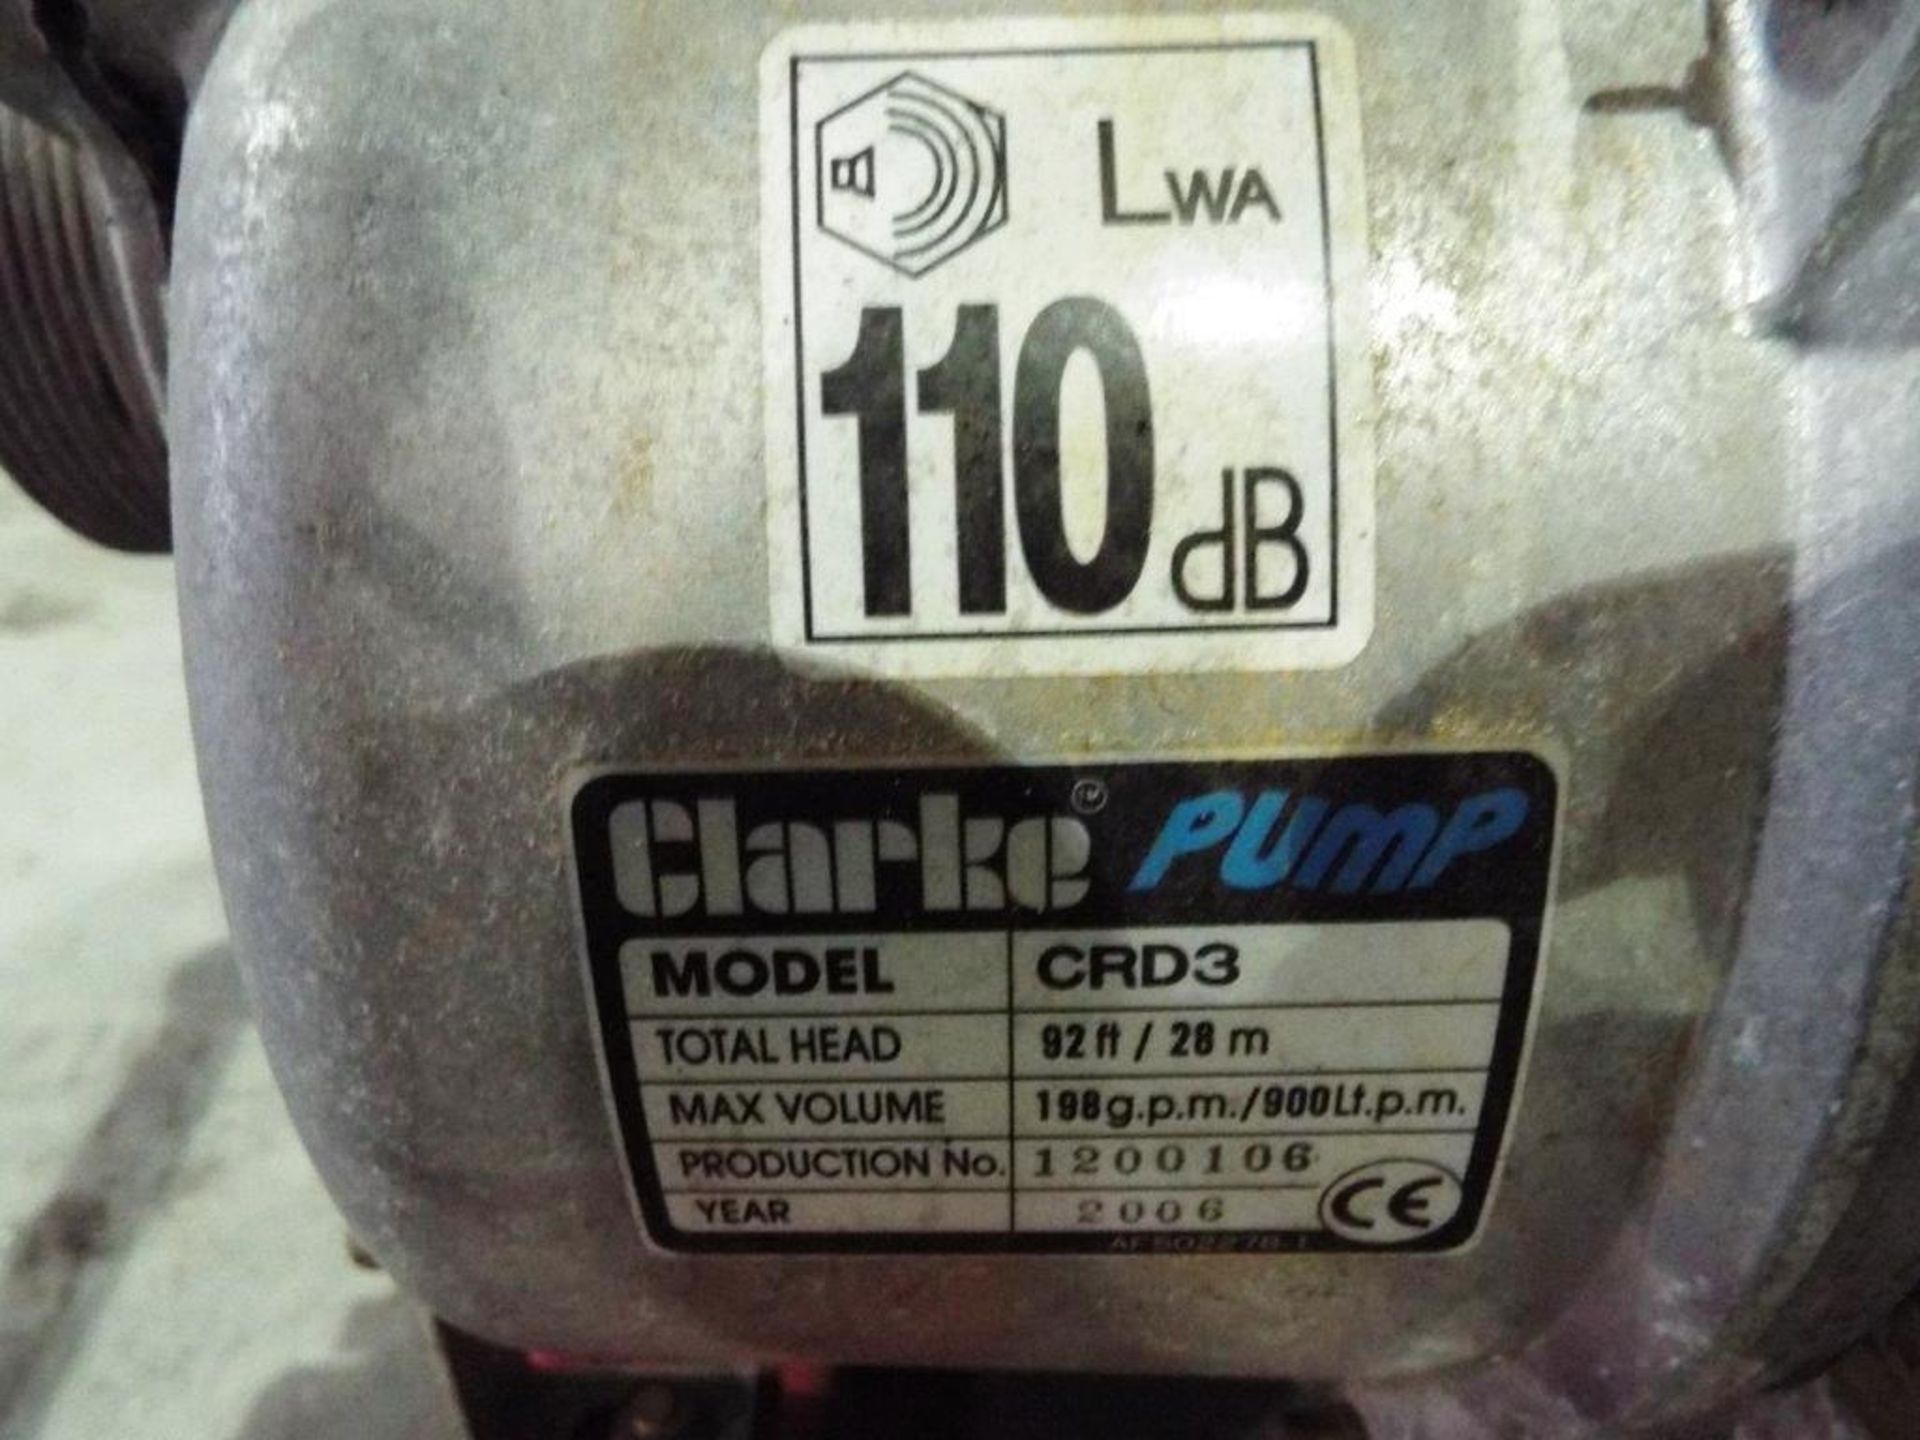 Robin DY23 Powered Clarke CRD3 Water Pump - Image 7 of 11